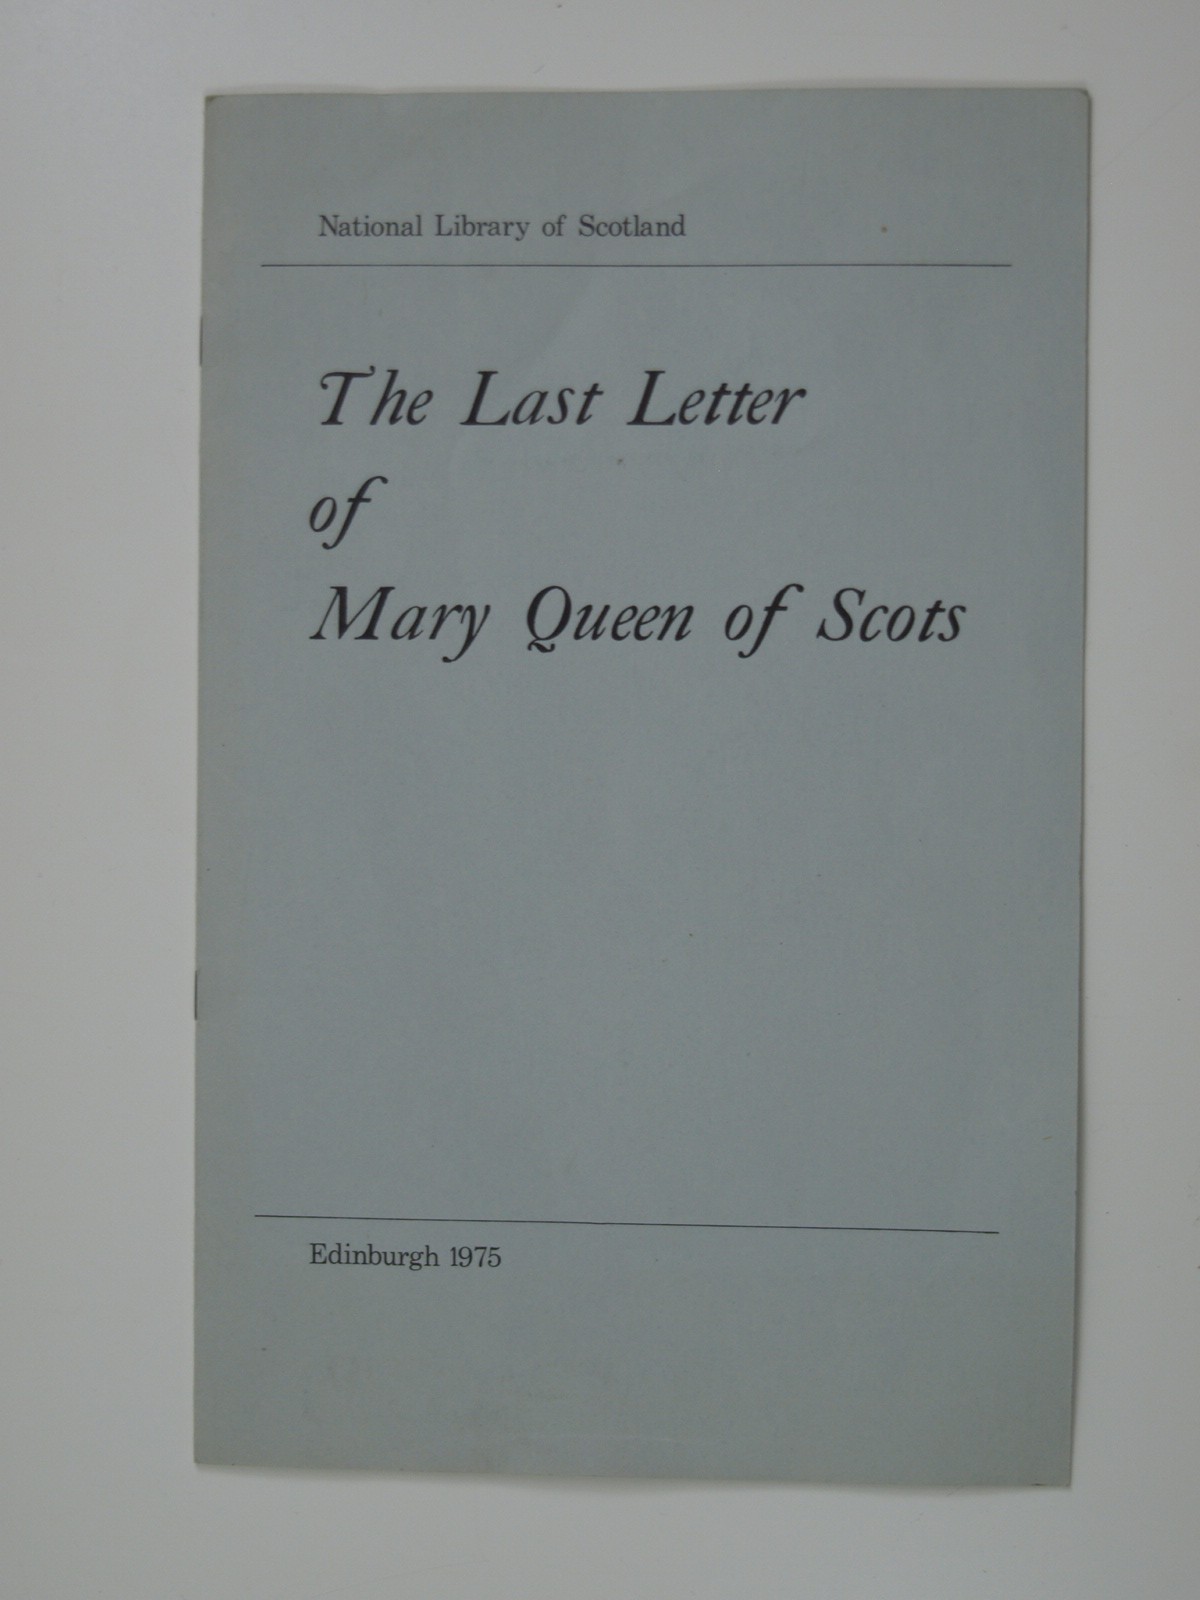 The Last Letter of Mary Queen of Scots